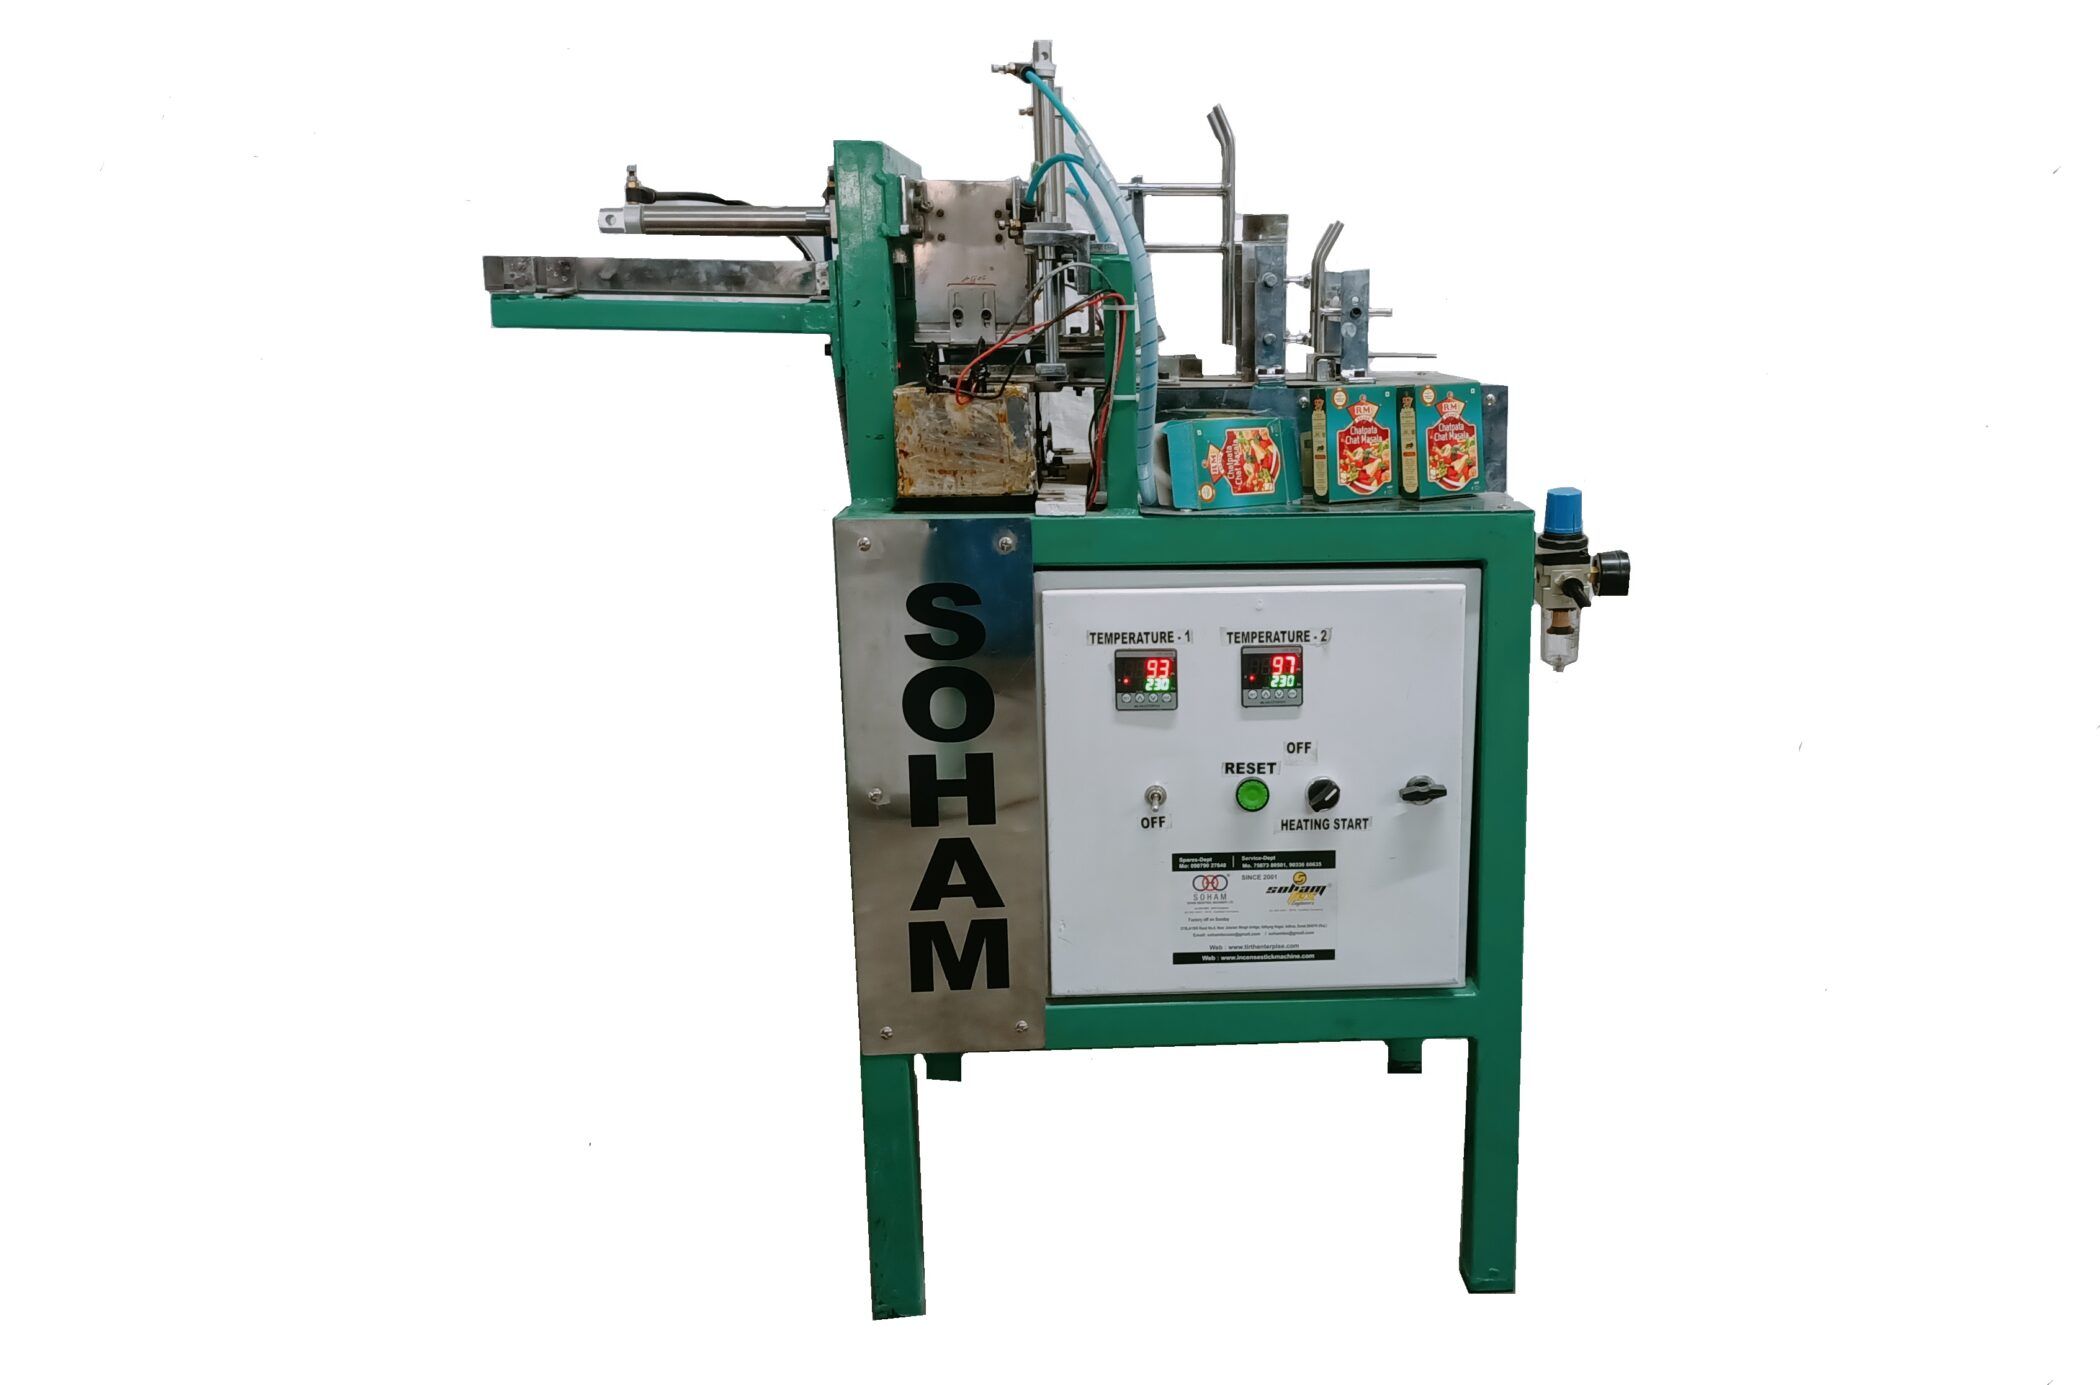 Primary Requirement for BOX GLUING AND FOLDING MACHINE